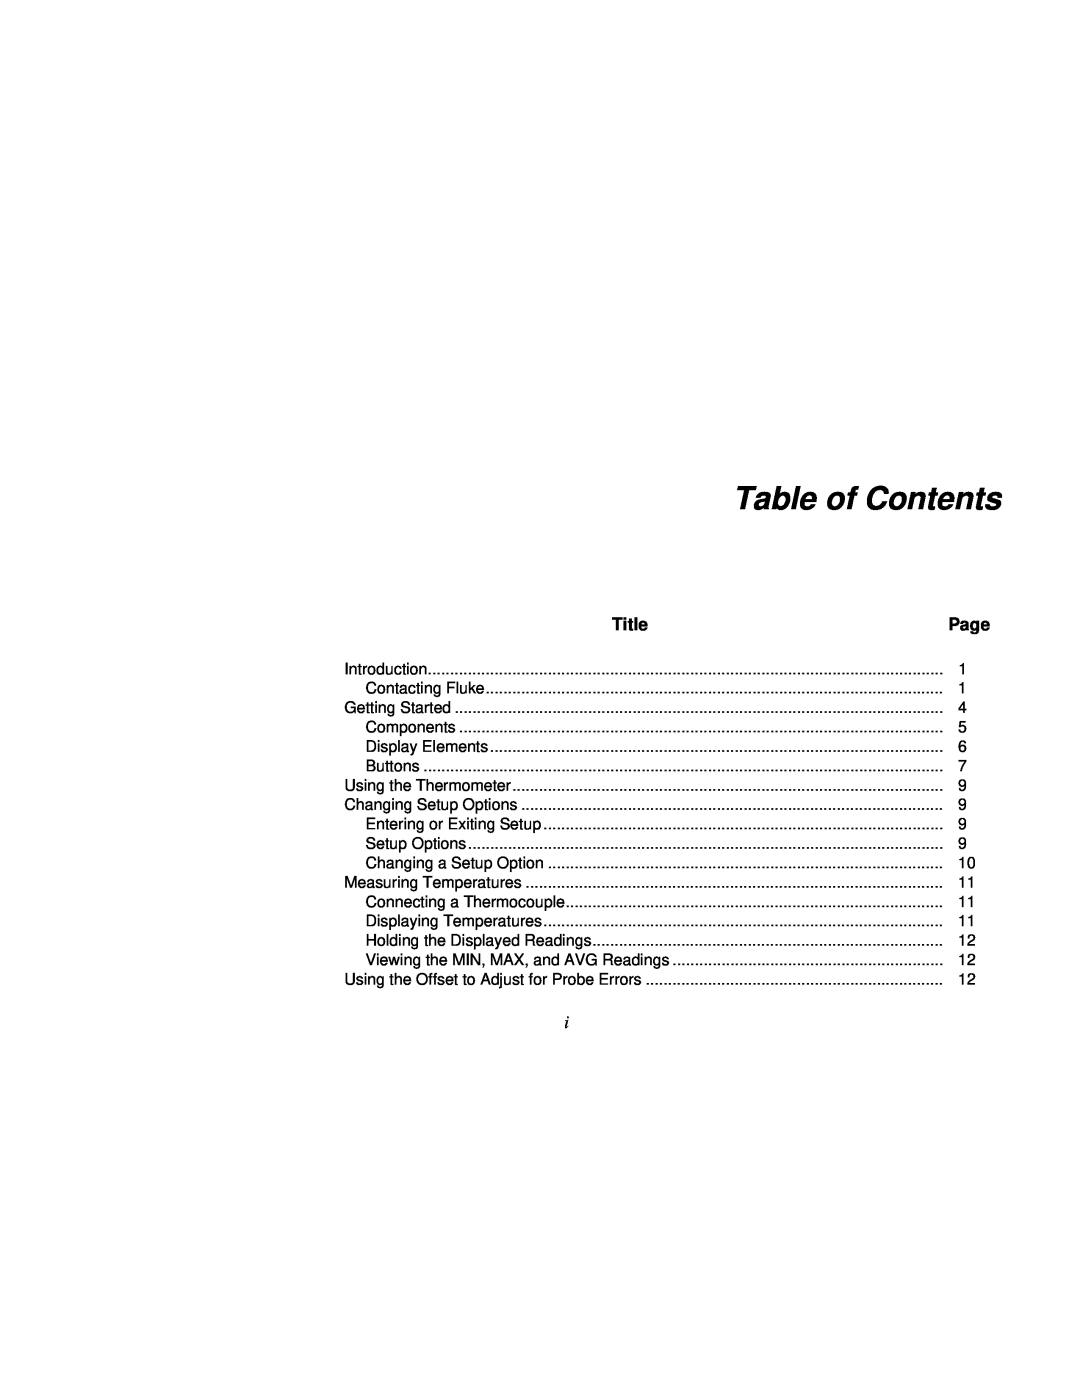 Fluke 51 & 52 Series II user manual Table of Contents, Title 